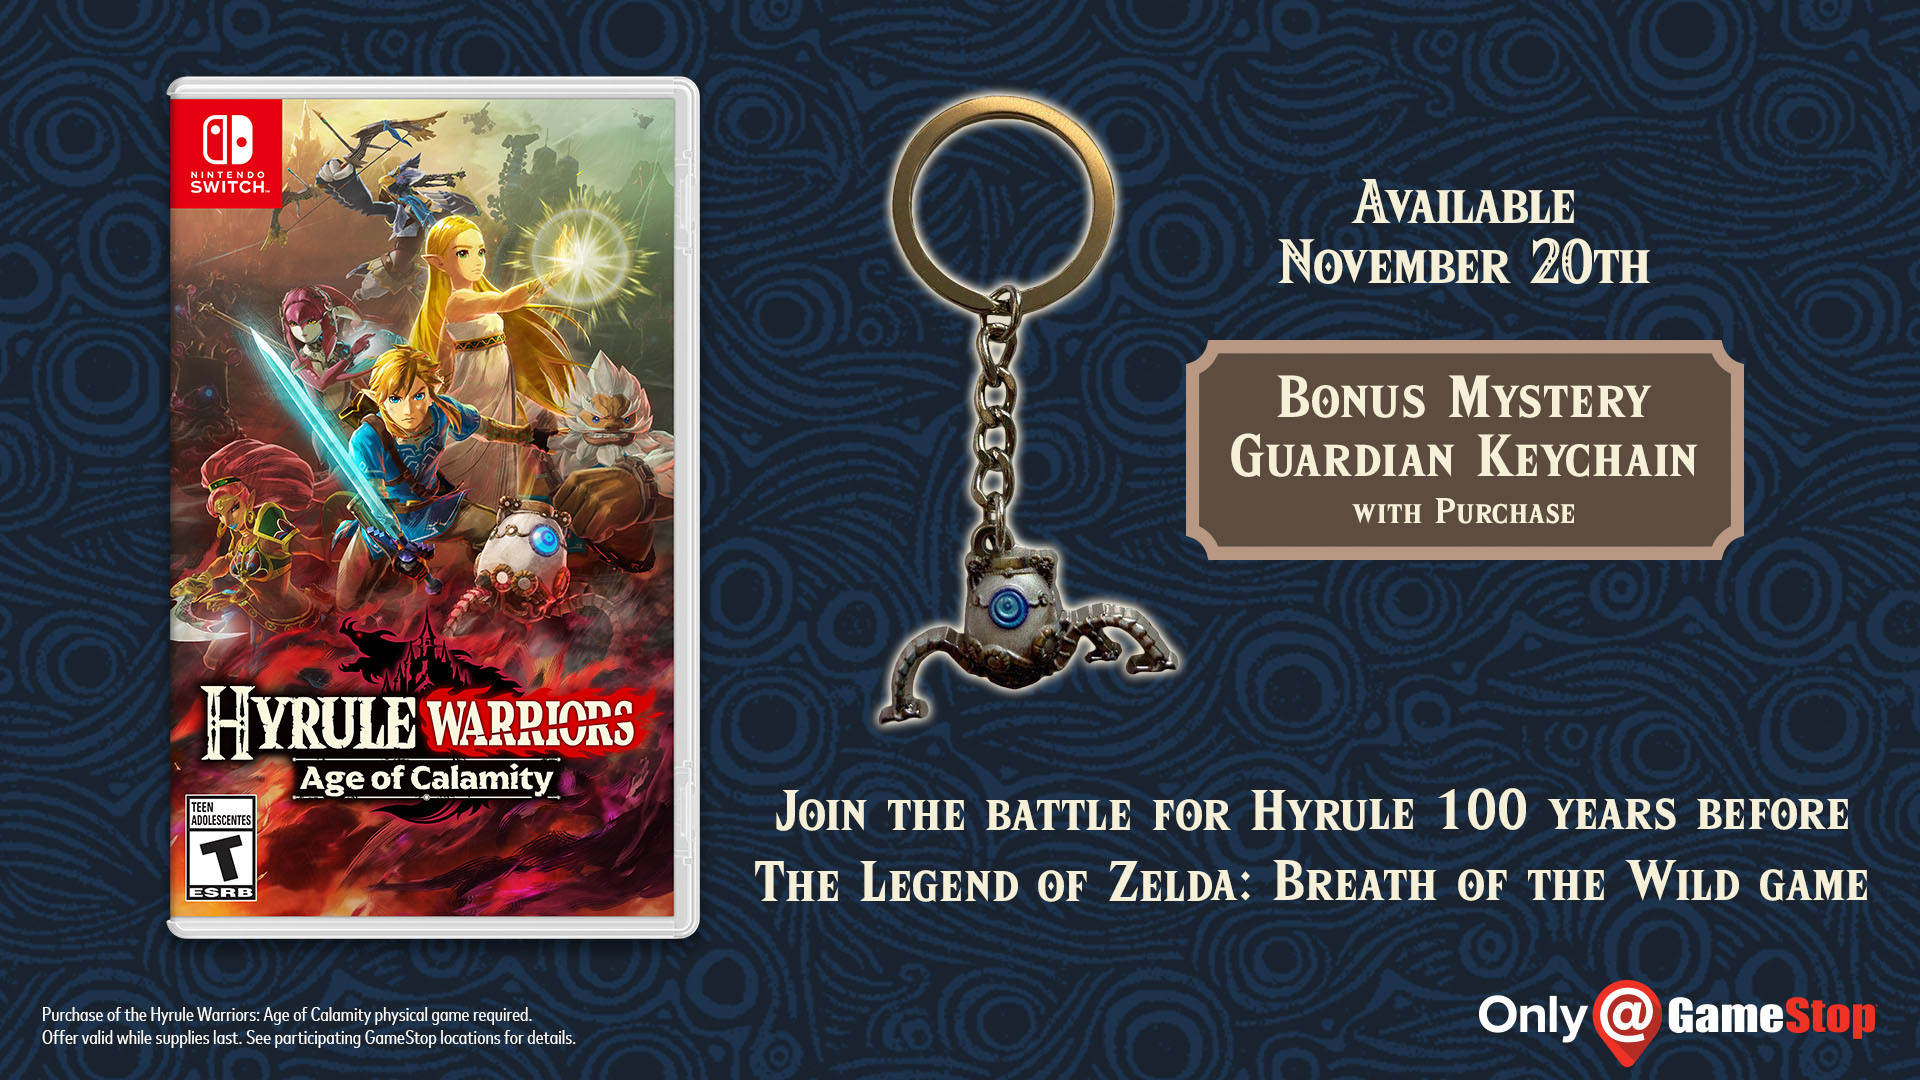 Hyrule Warriors: Age Of Calamity Launch Guide: Last Chance To Get Neat Preorder Bonus - GameSpot